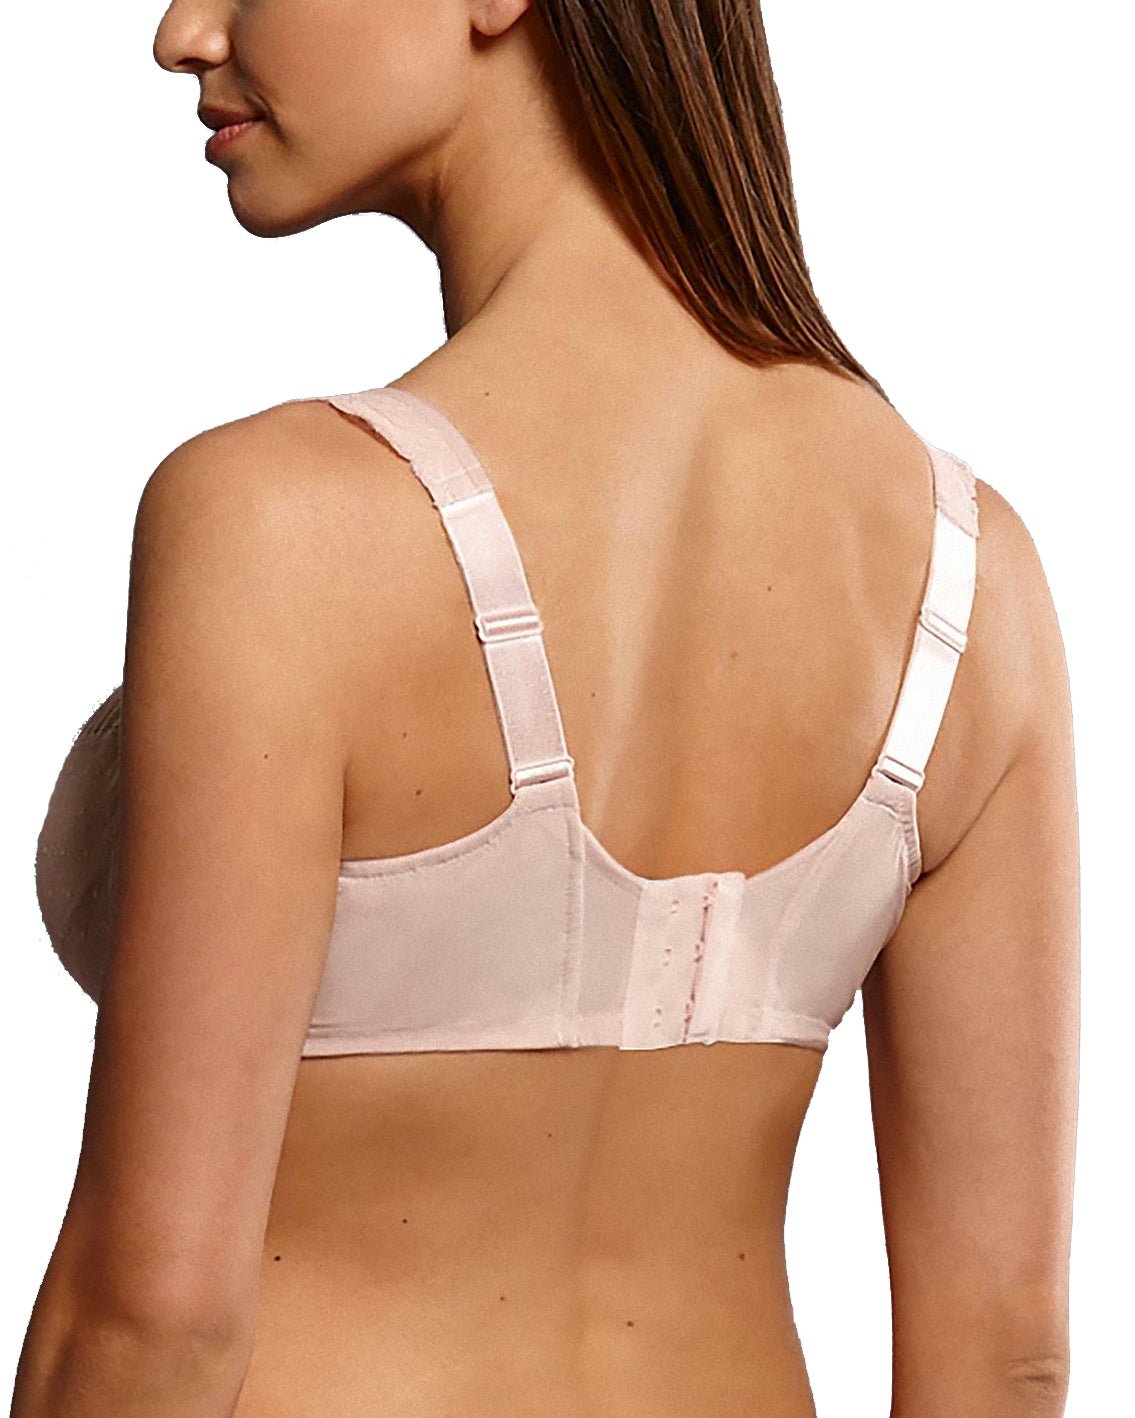 SELMA - Big cup bra with underwire